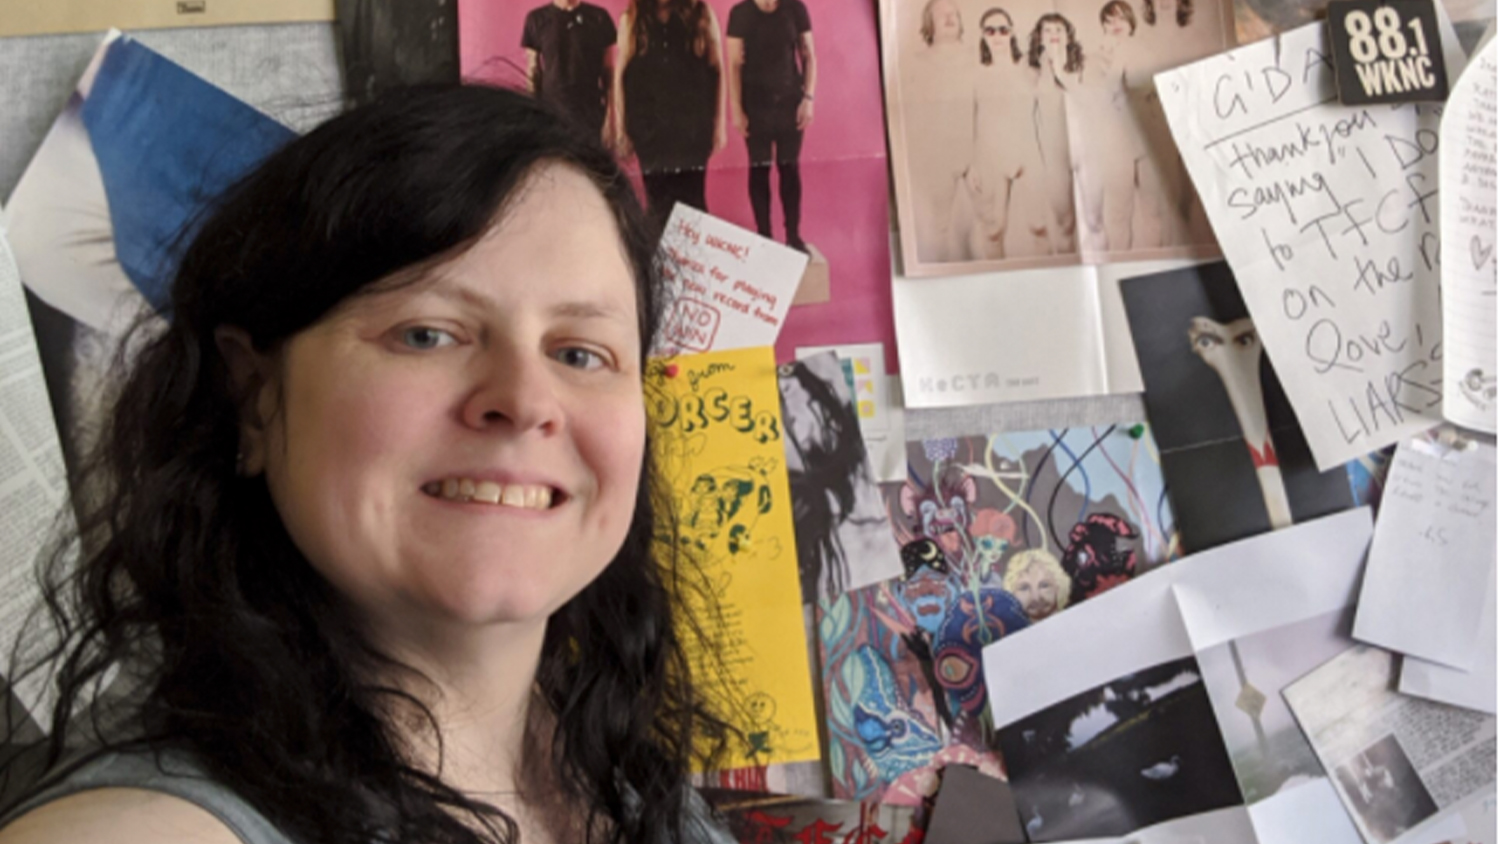 Jamie Lynn Gilbert in front of a wall full of music-related posters